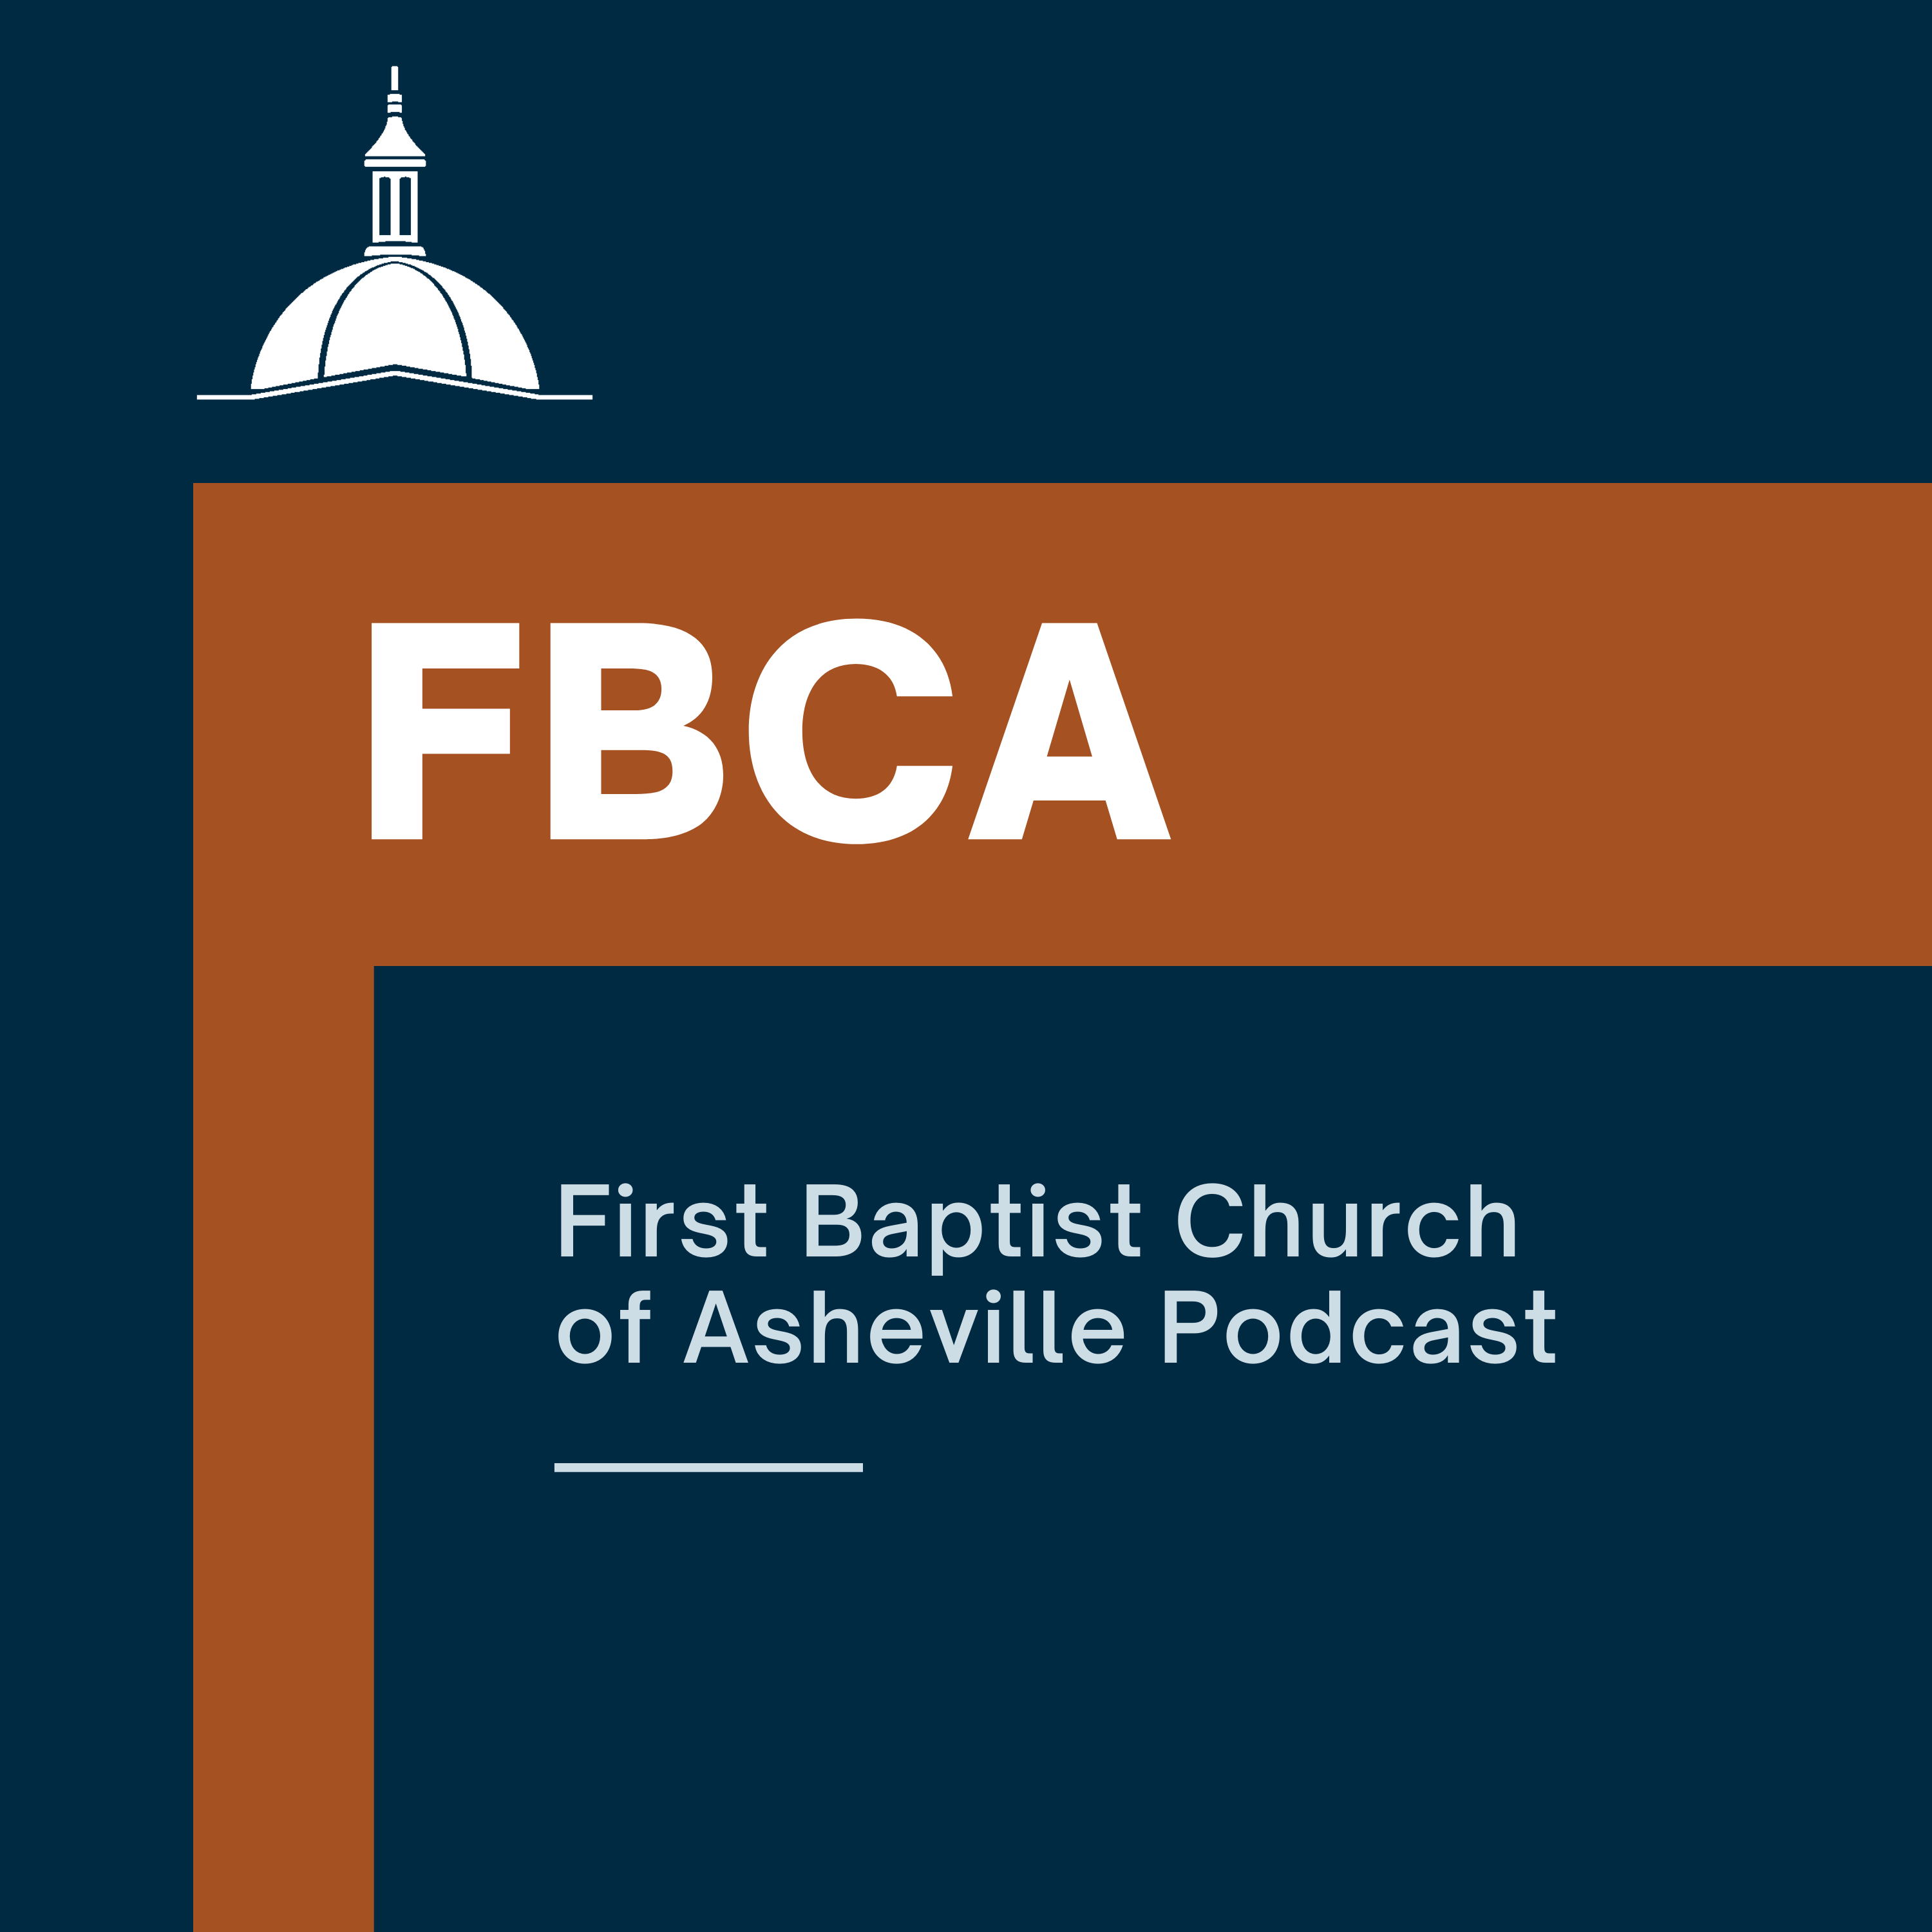 First Baptist Church of Asheville Podcast